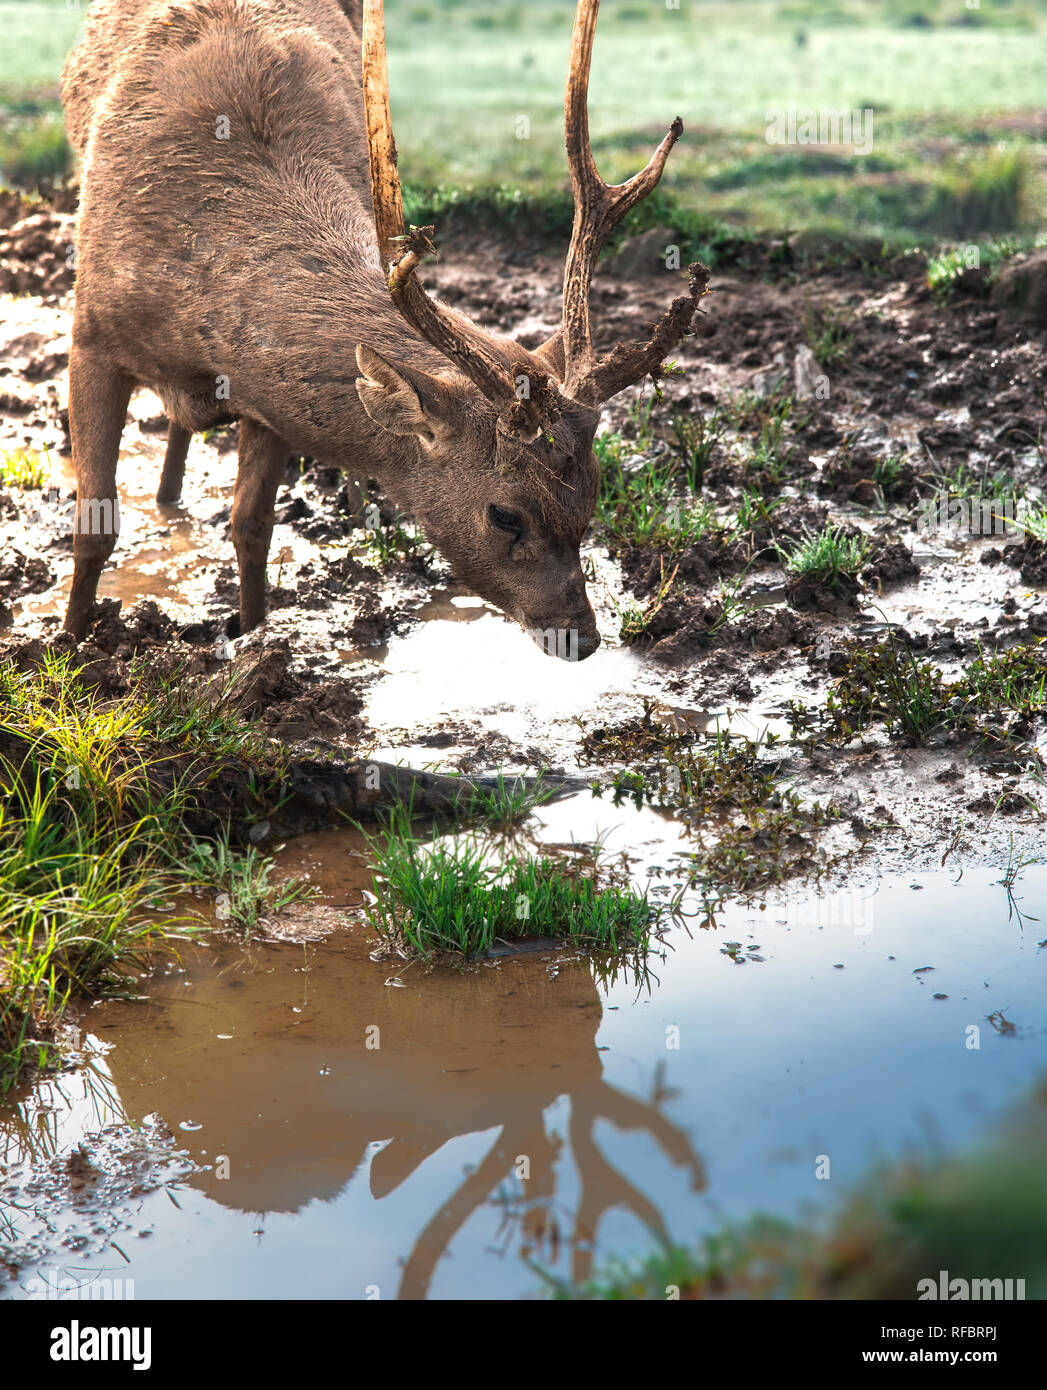 Deer or Stag with Broken Antlers Thirsty and Drinking Fresh Muddy Water At The River Side Stock Photo